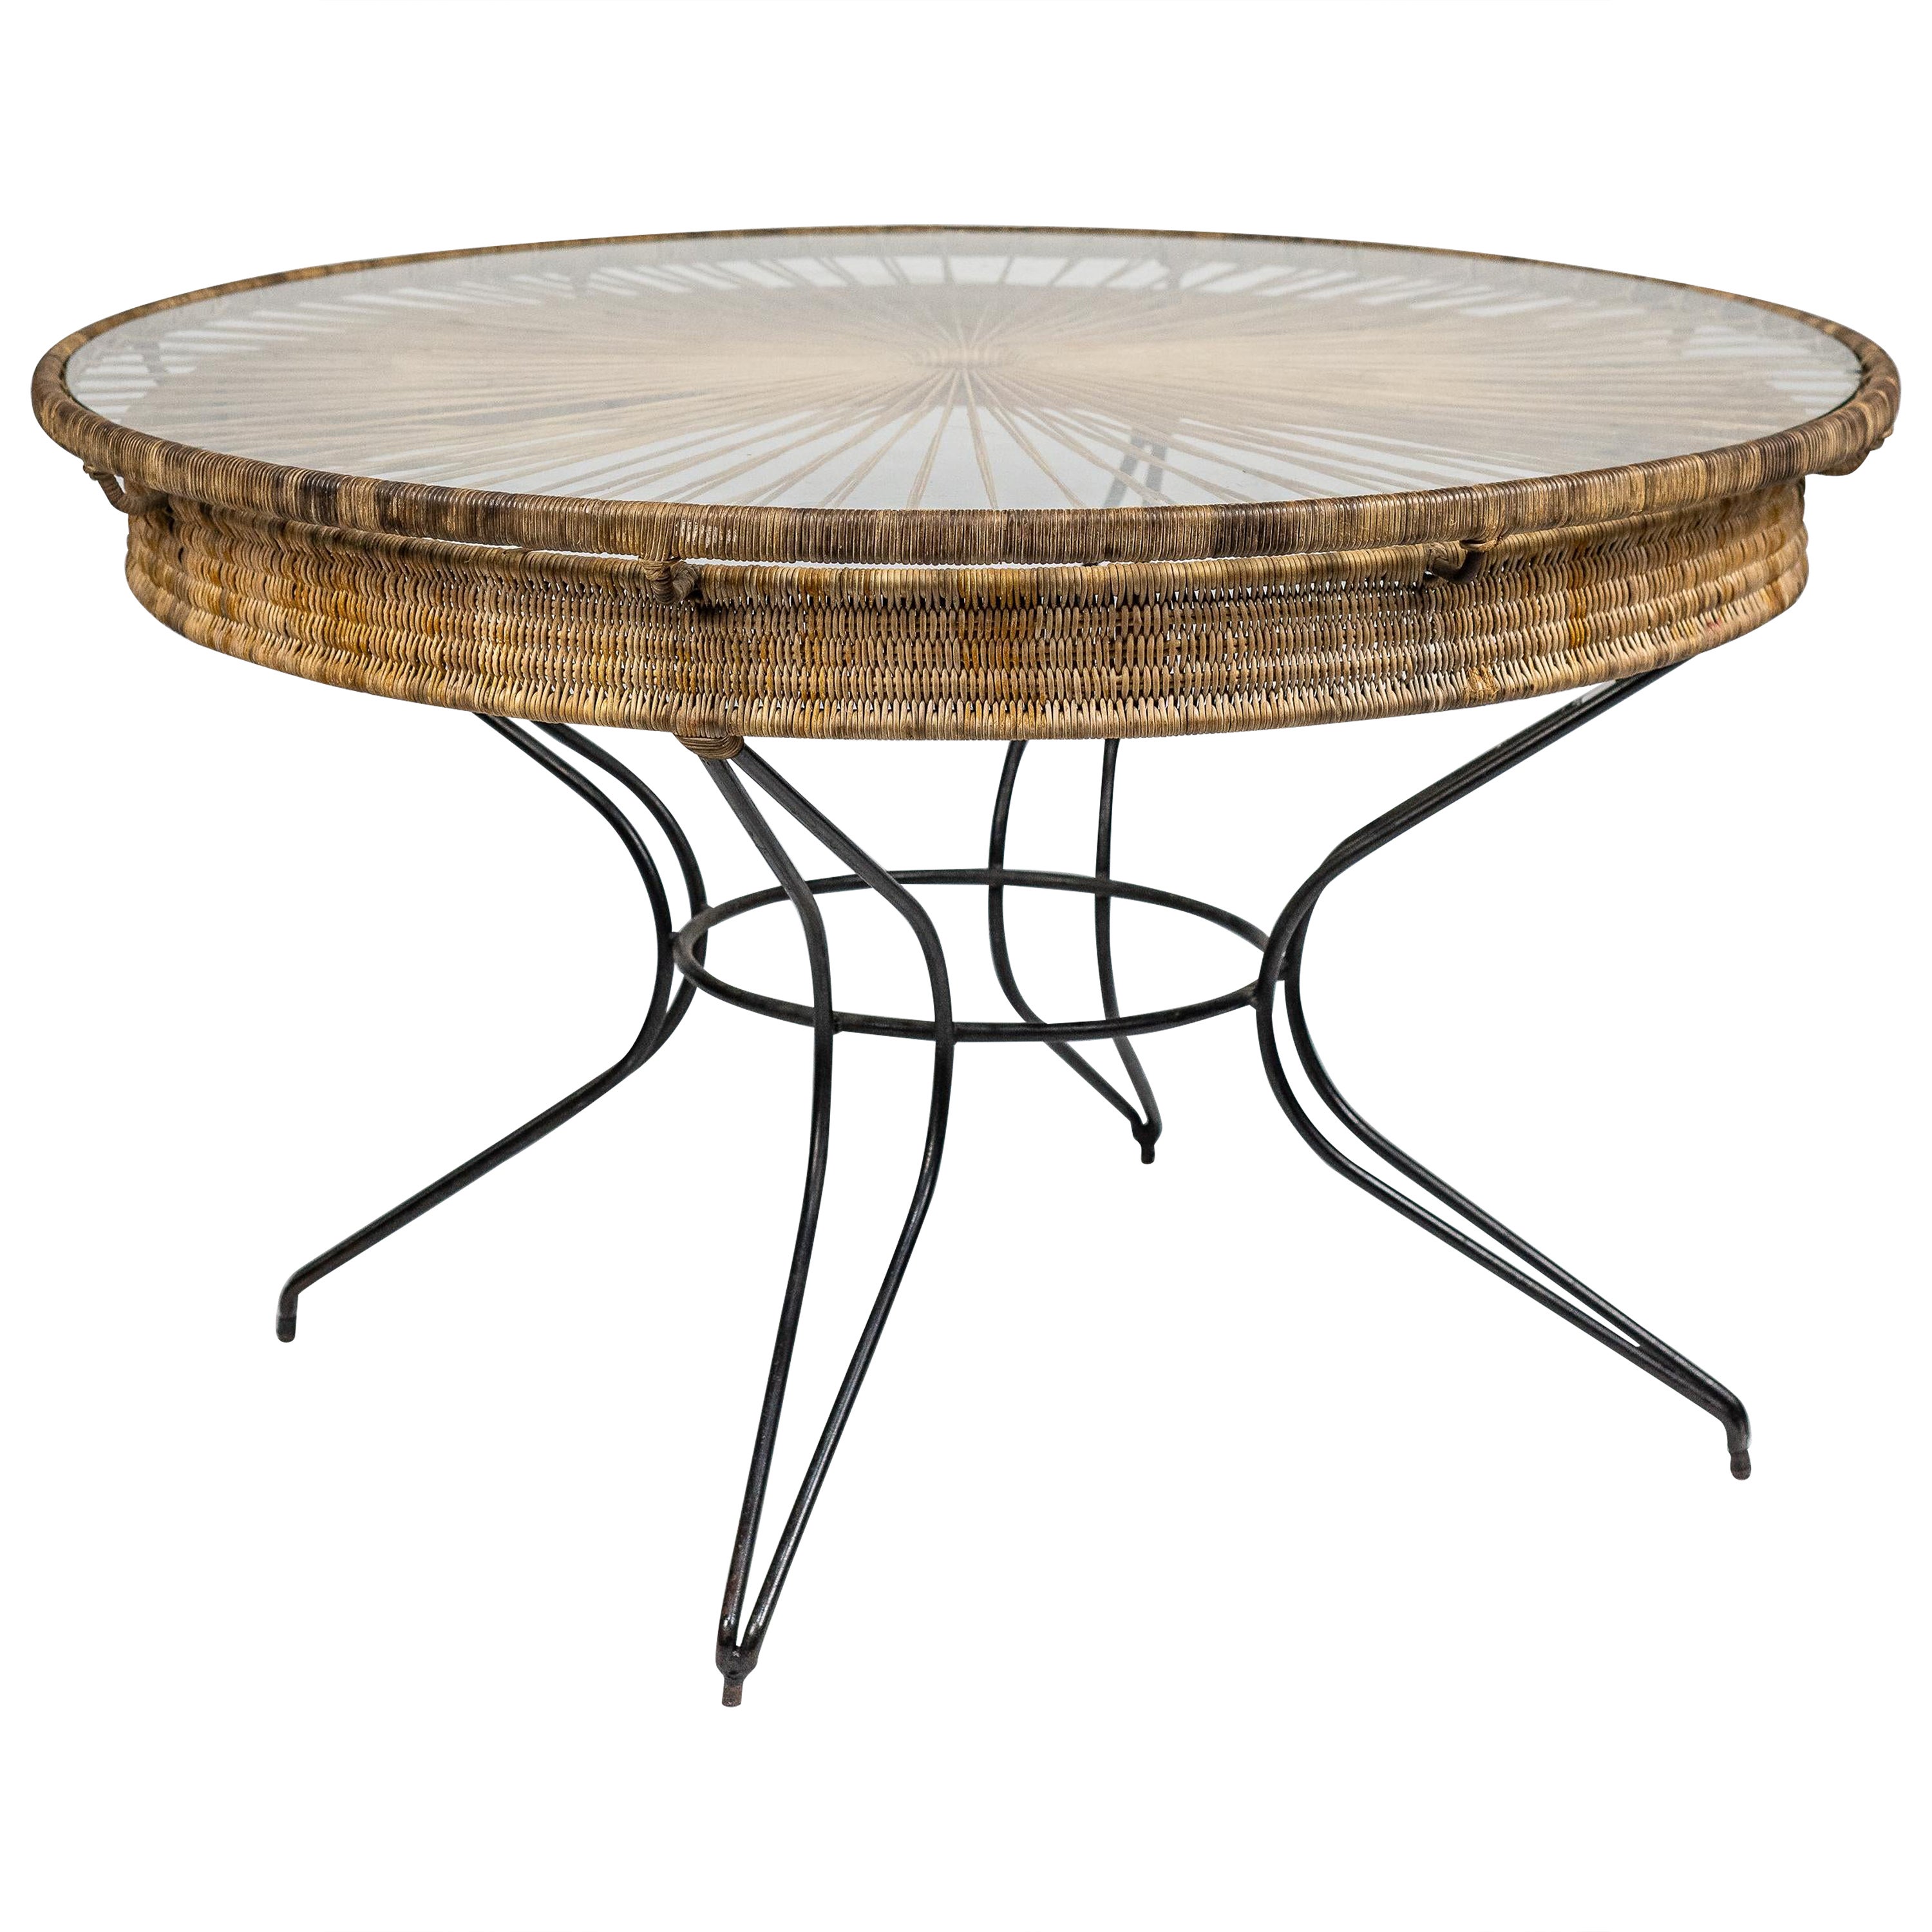 Carlo Hauner. Round dining table with glass, c. 1950